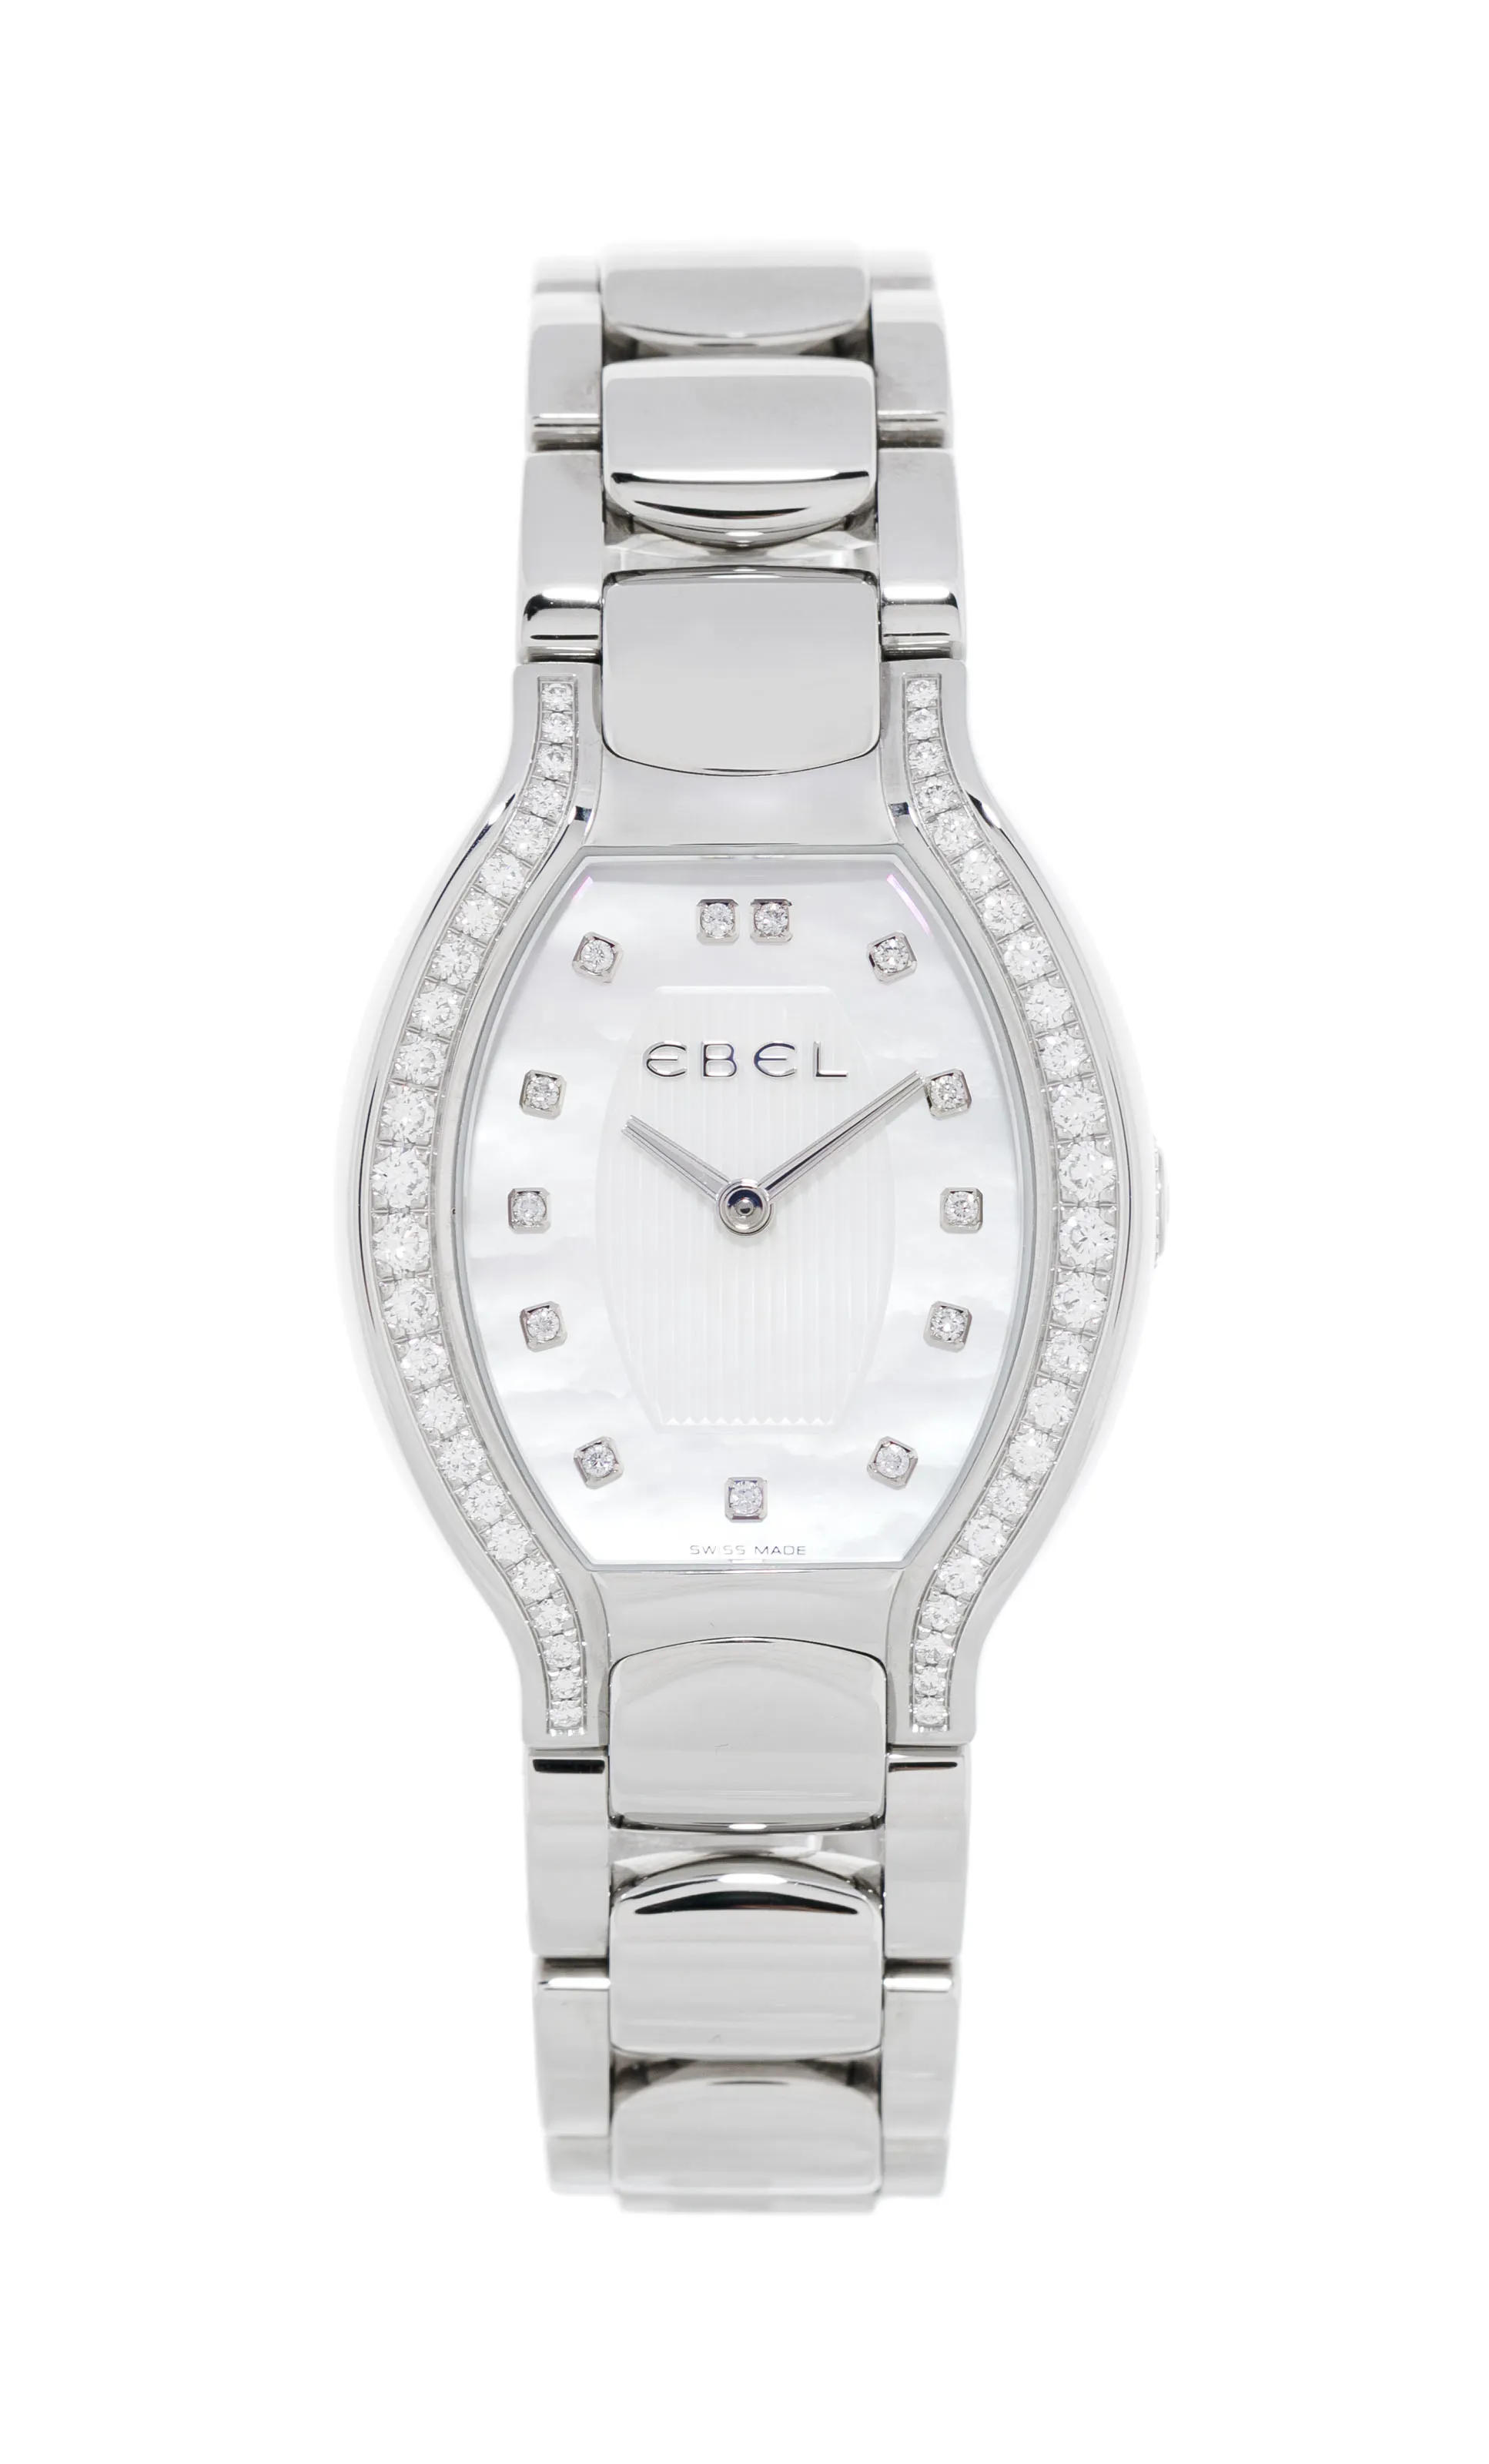 Ebel Beluga 31mm Stainess steel & diamond Mother-of-pearl